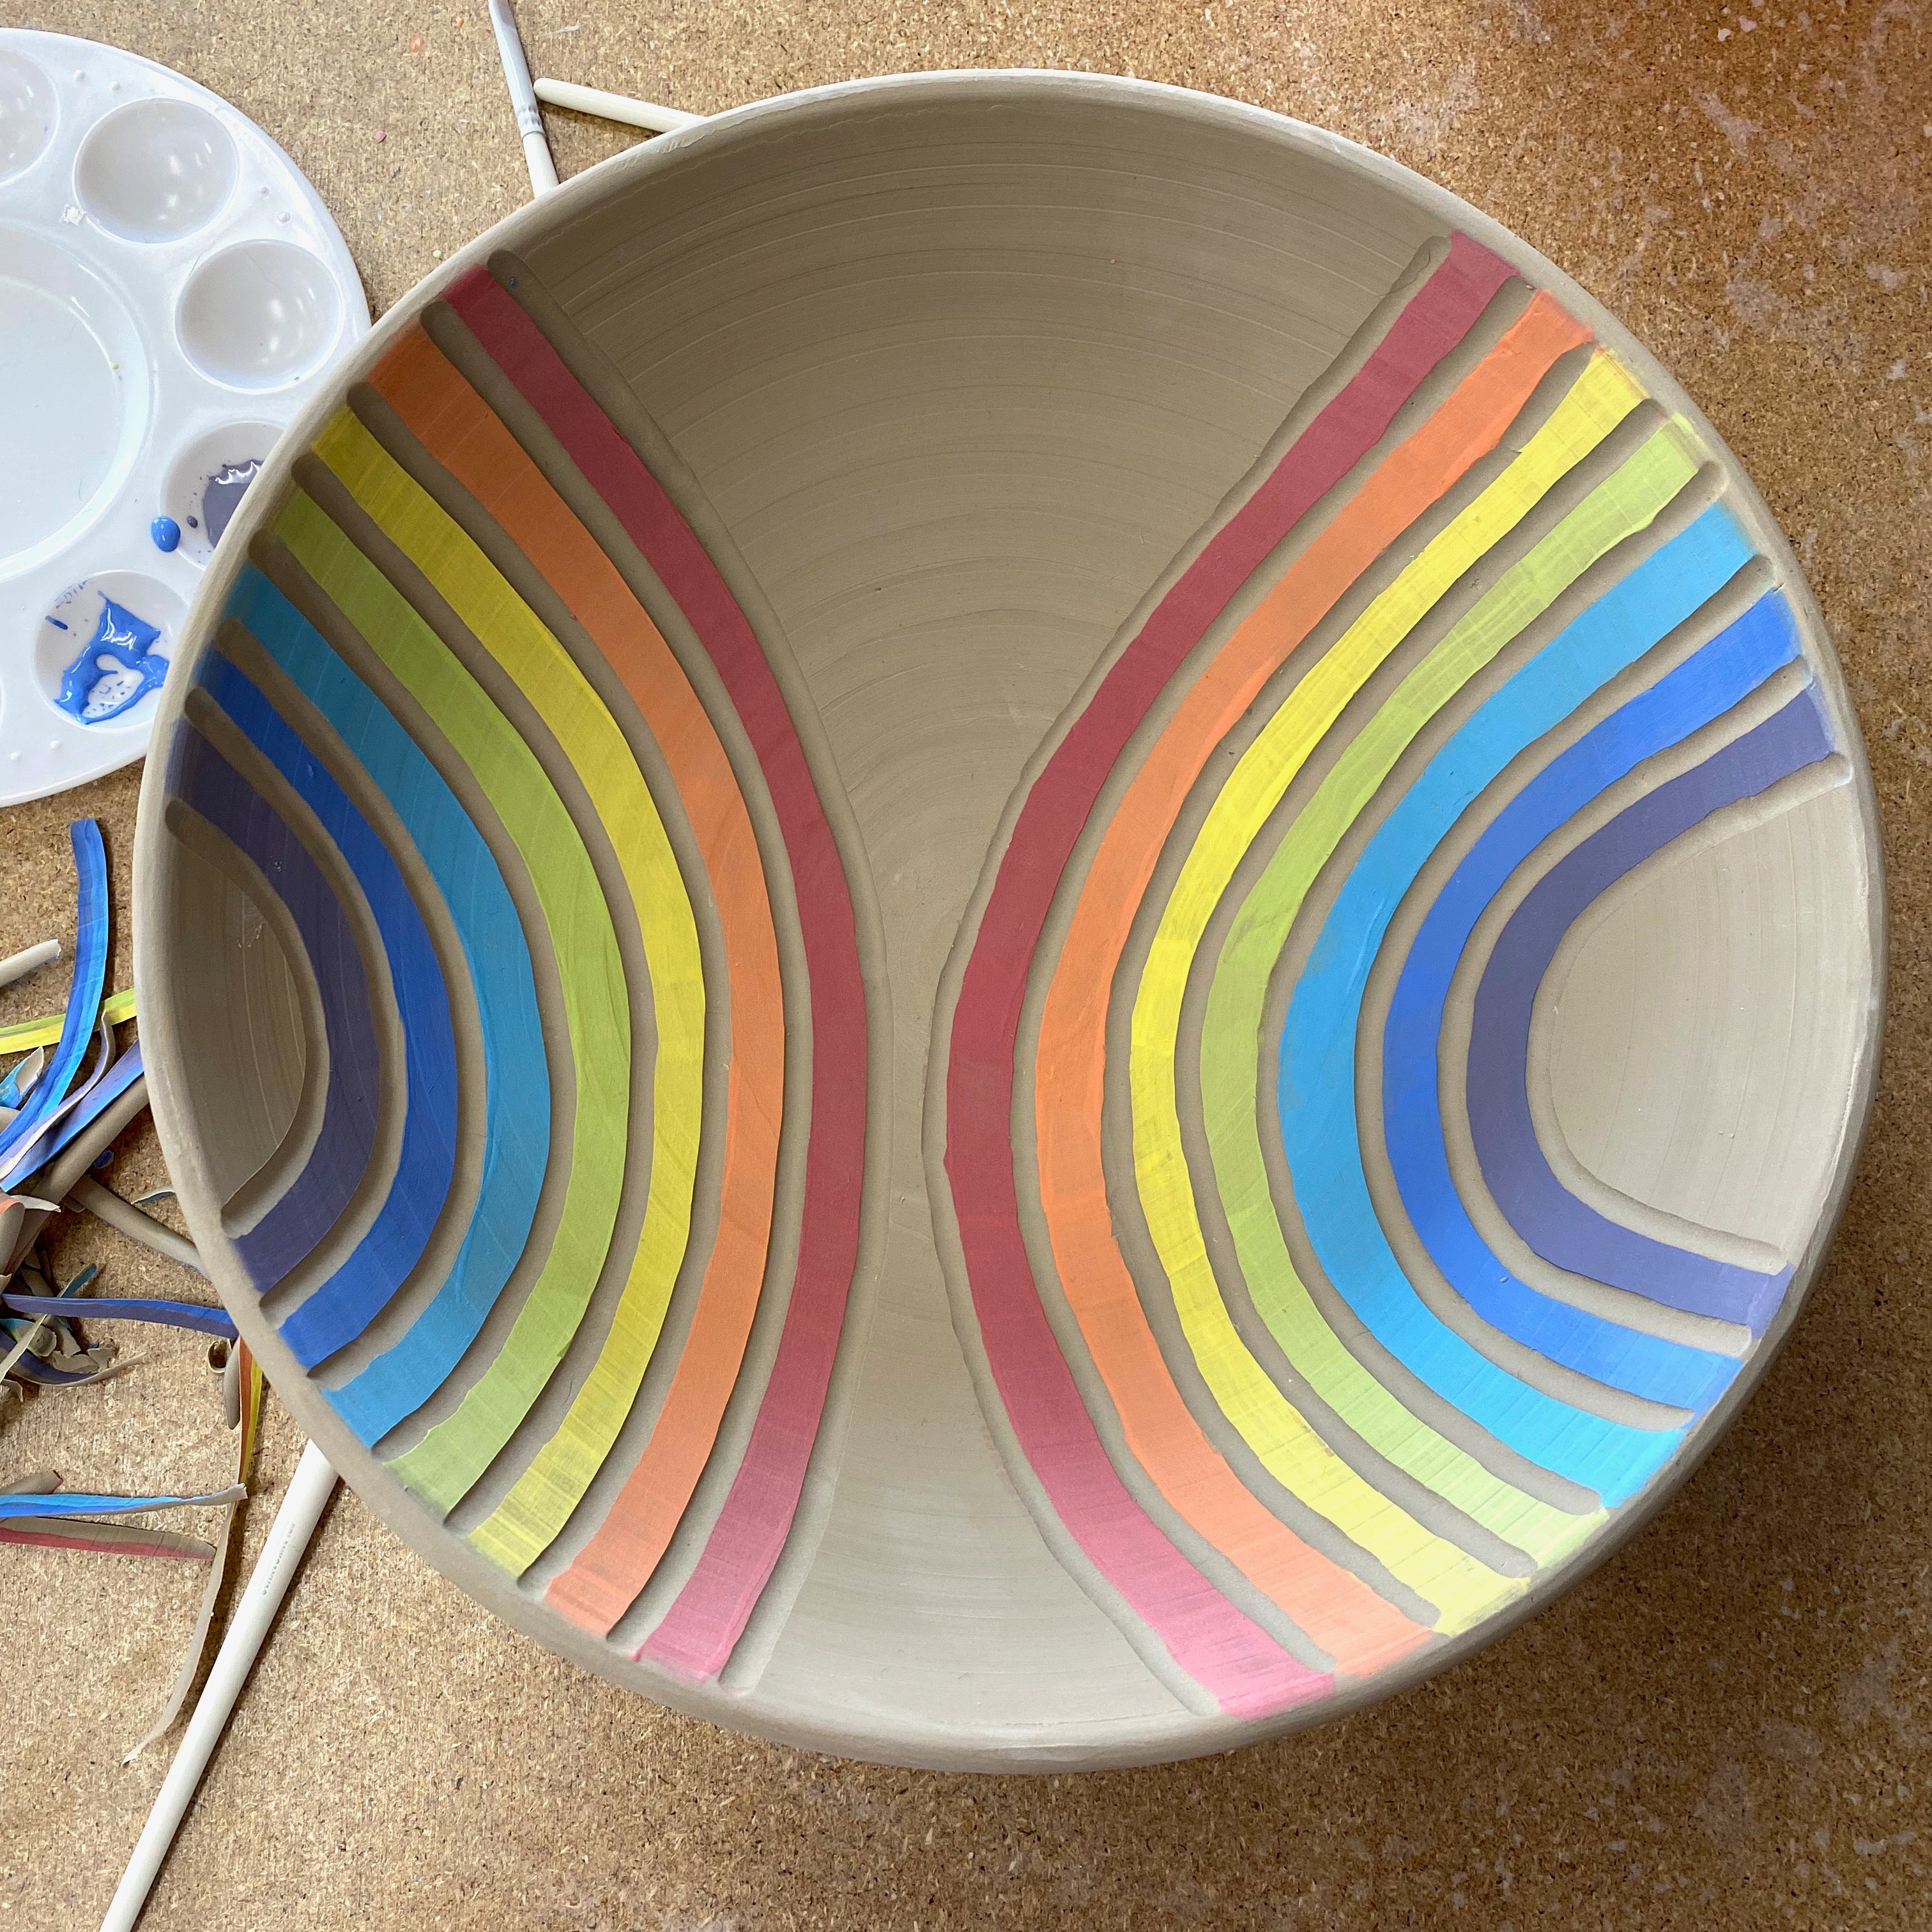 A greenware porcelain bowl seen from above, decorated with painted and carved rainbows.